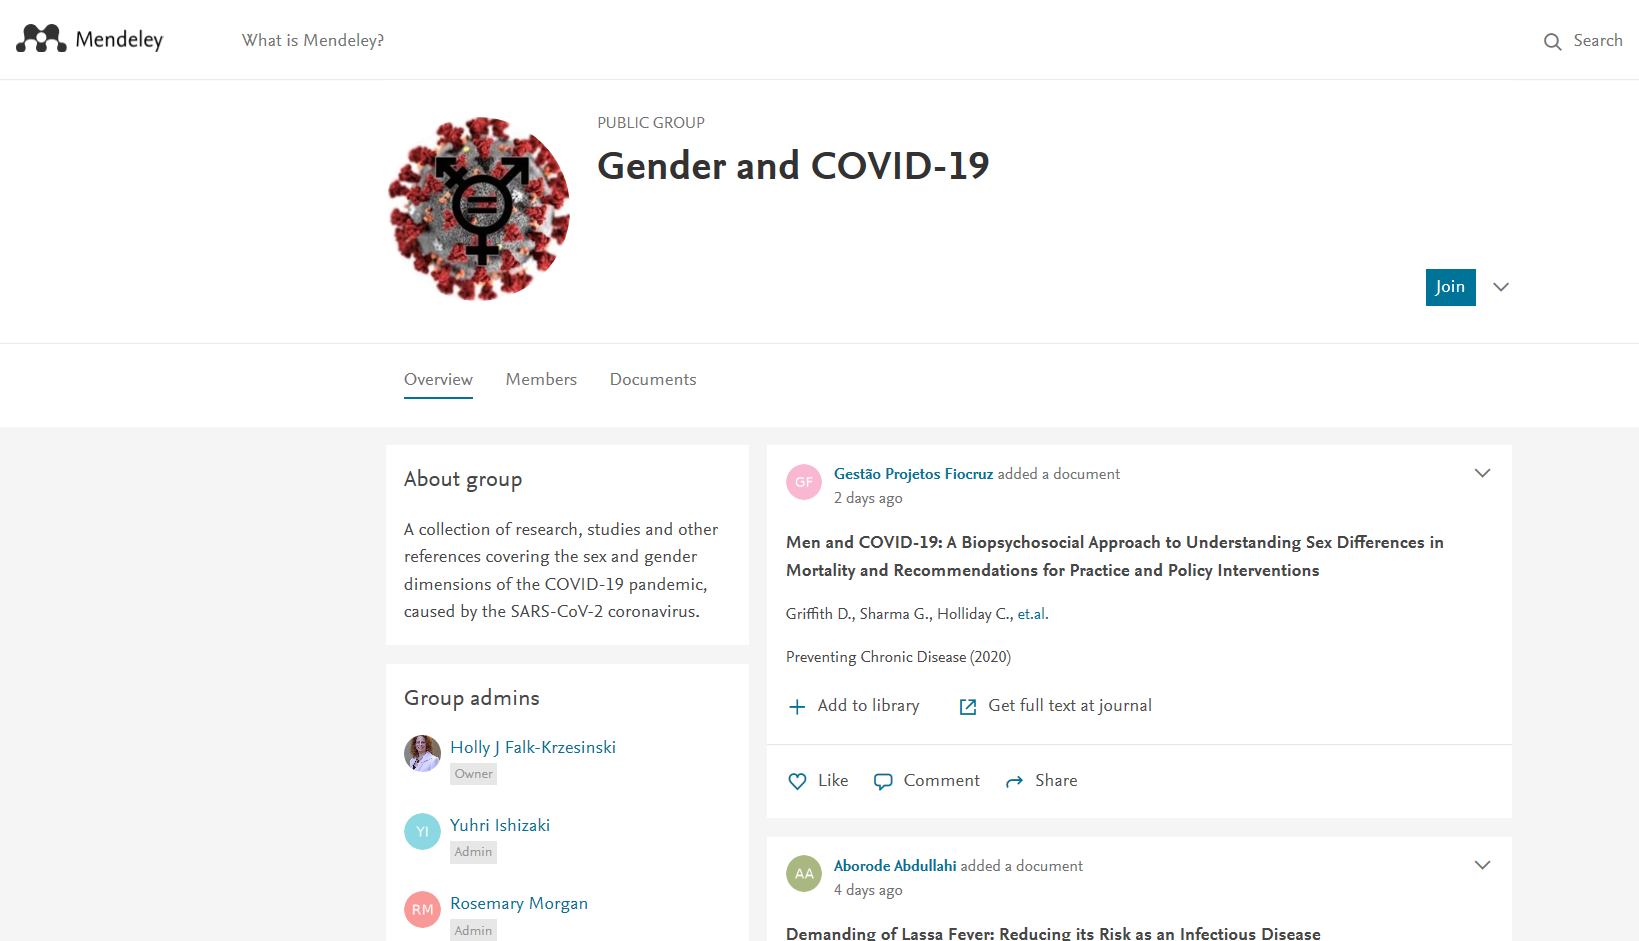 Gender and COVID-19 Mendeley group